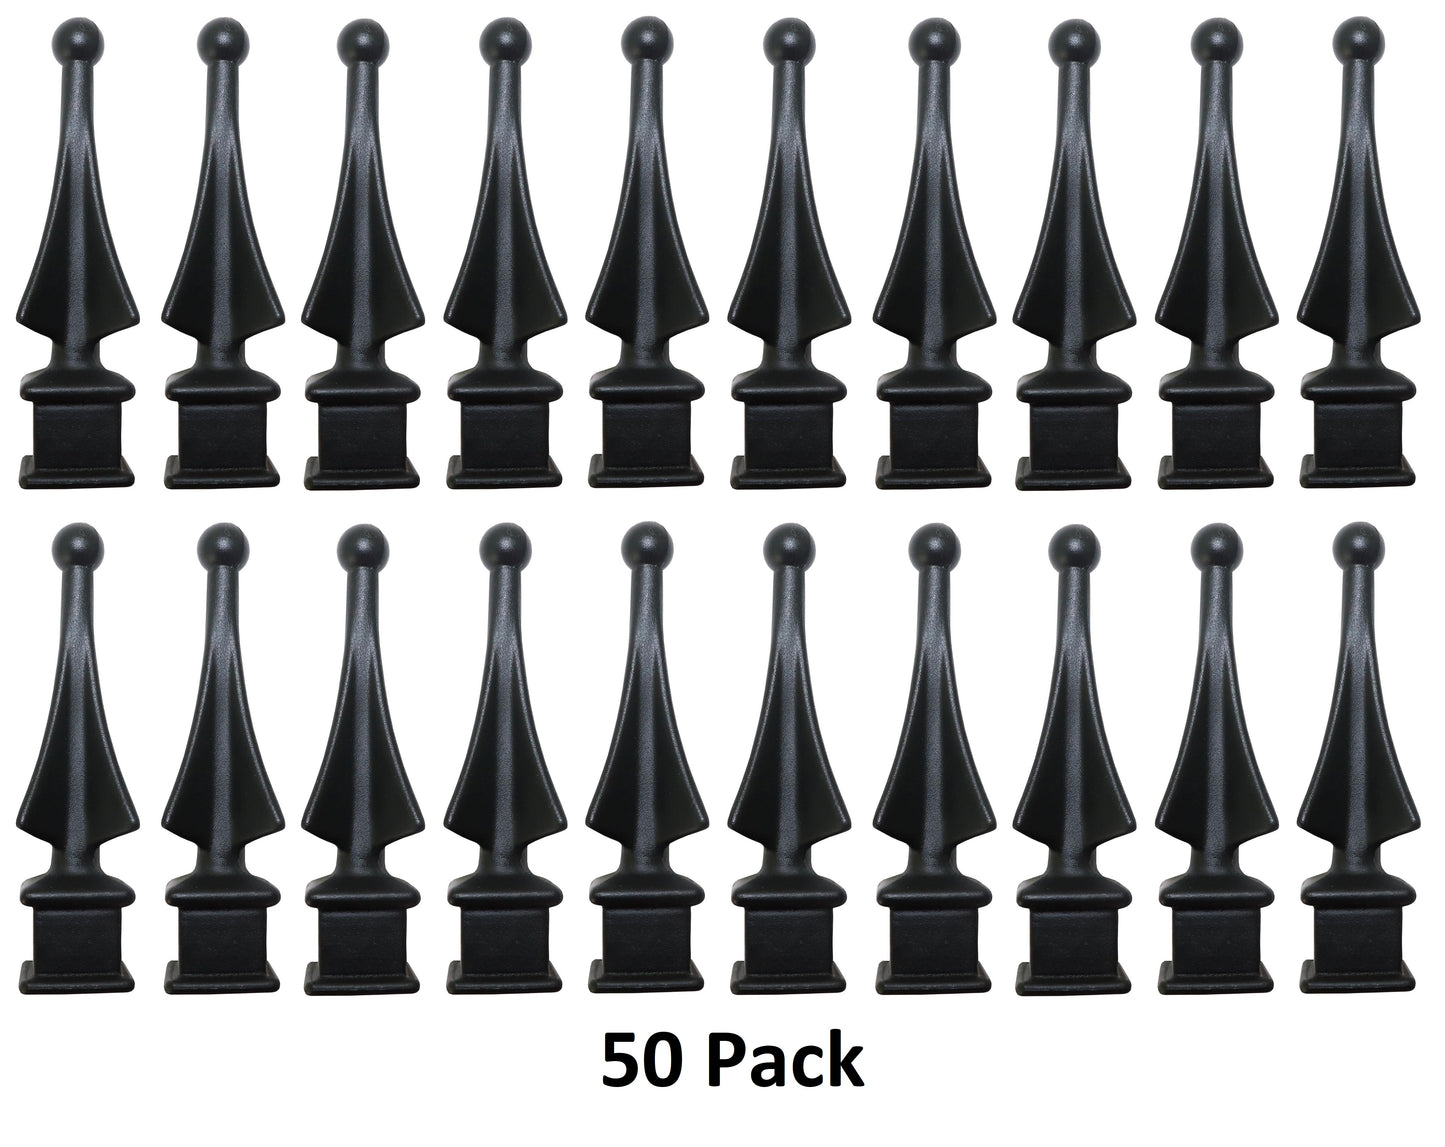 Black Plastic 3/4" Four-Sided Spire Wing Tip Finial Fence Topper for Iron Picket Fence 3/4" posts